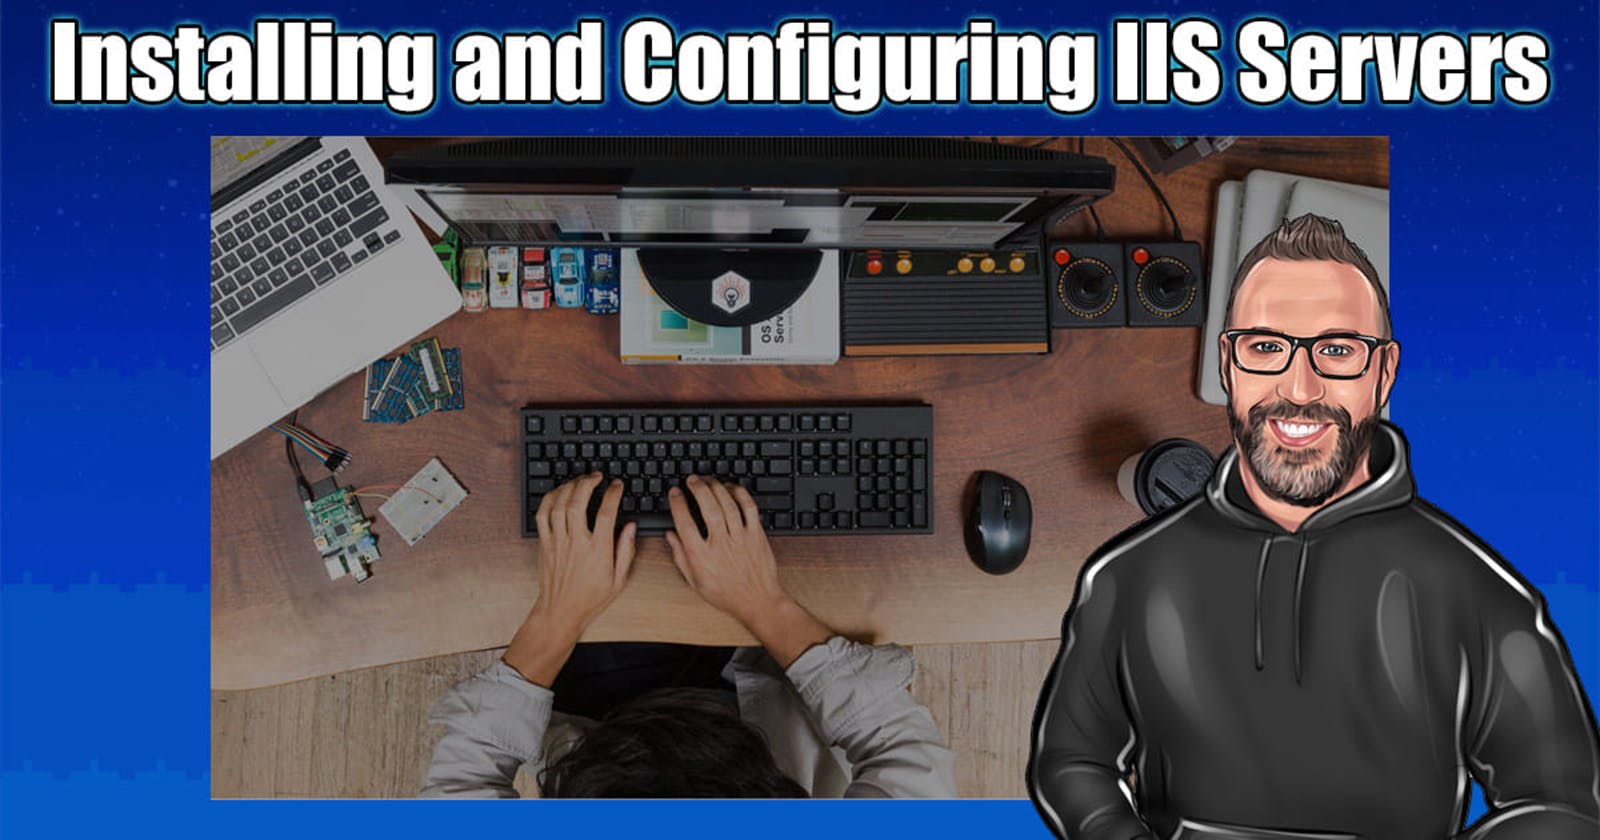 Installing and Configuring IIS Servers